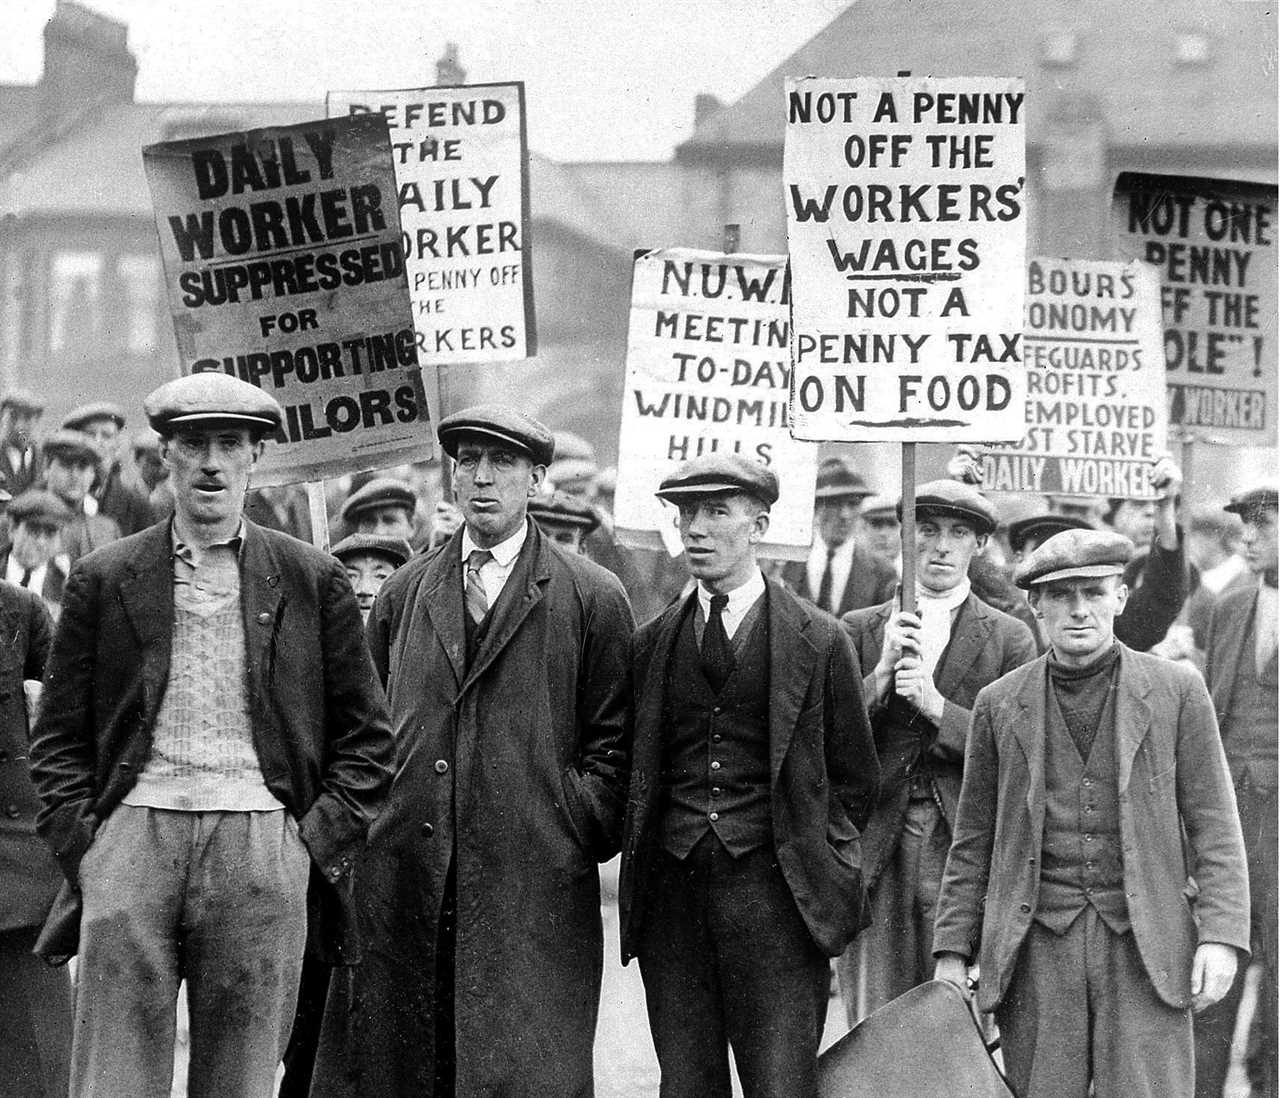 Militant unions spark fears of a general strike – as they’re set to meet this week